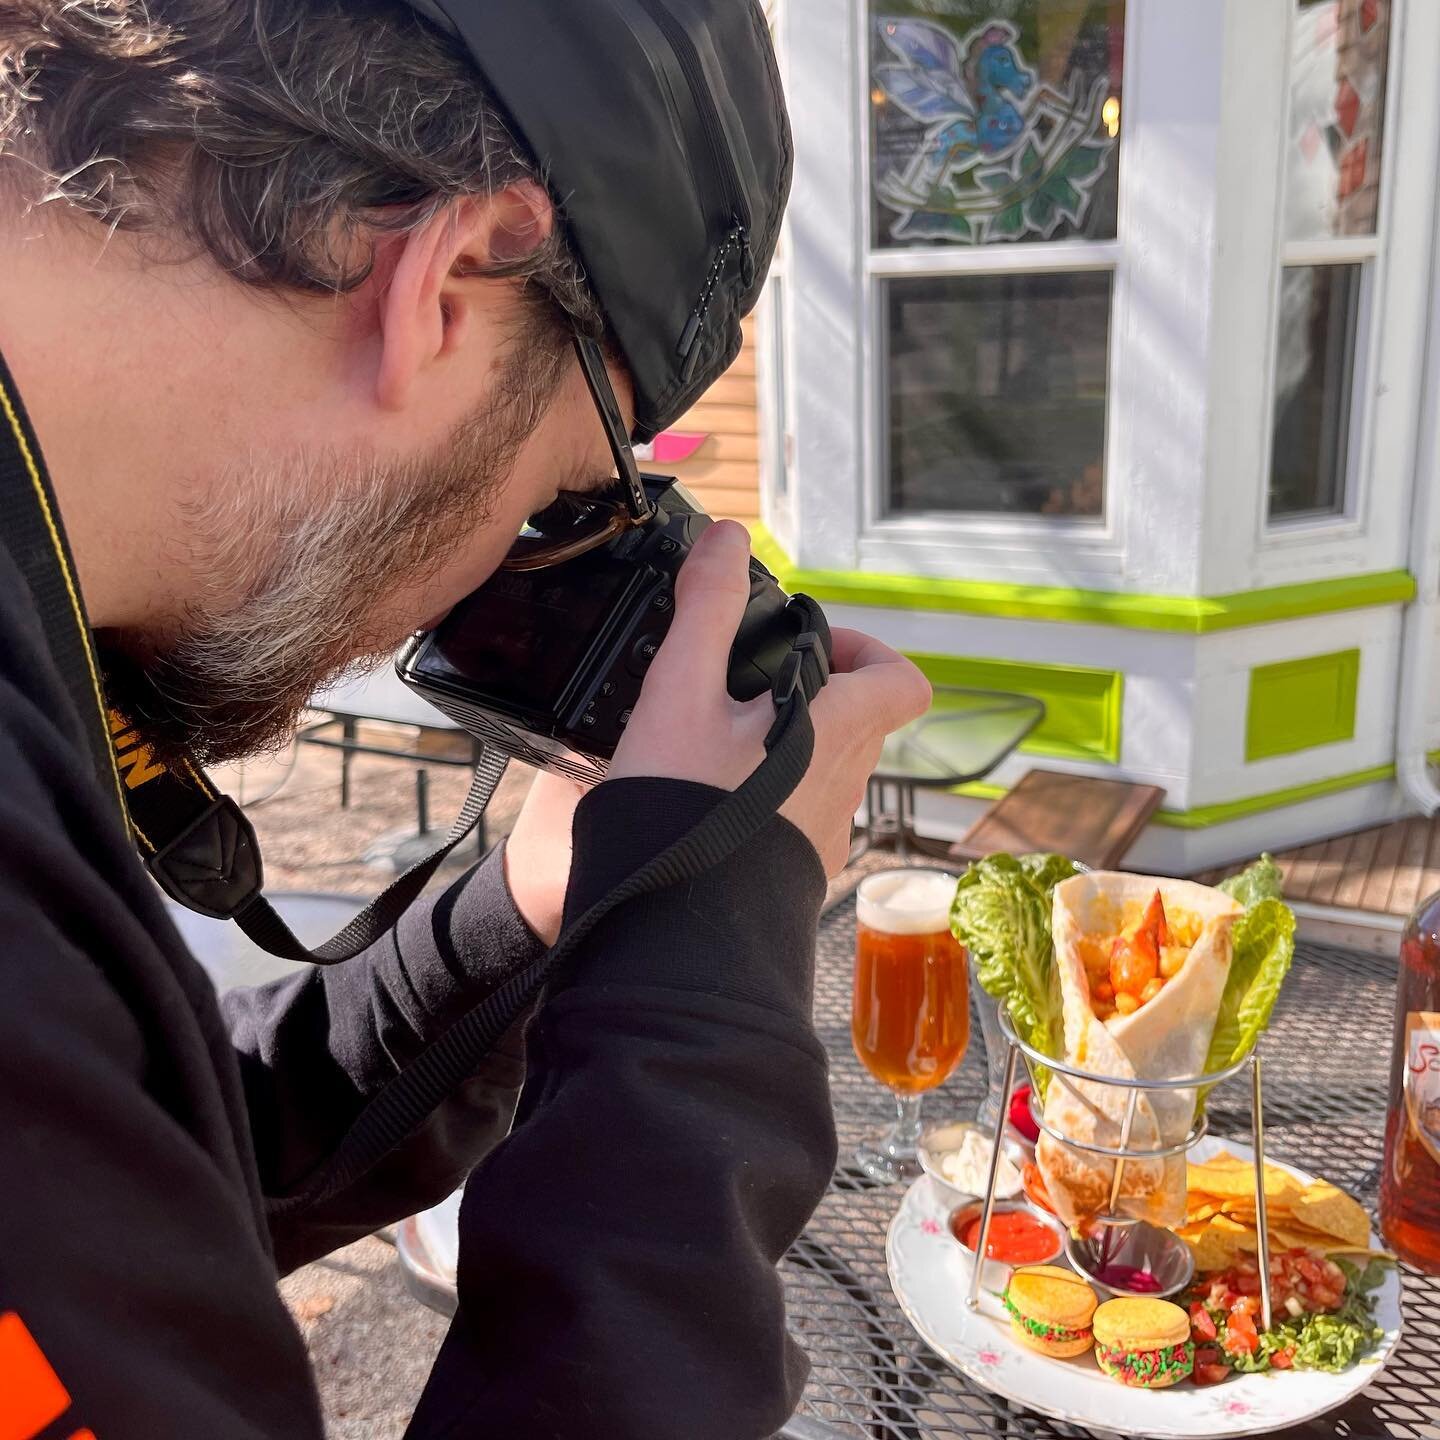 @jaredbetts capturing our lobster shrimp &amp; scallop curry maple taco for #TACO WEEK!!!
#monctontacoweek #shediac #seafood